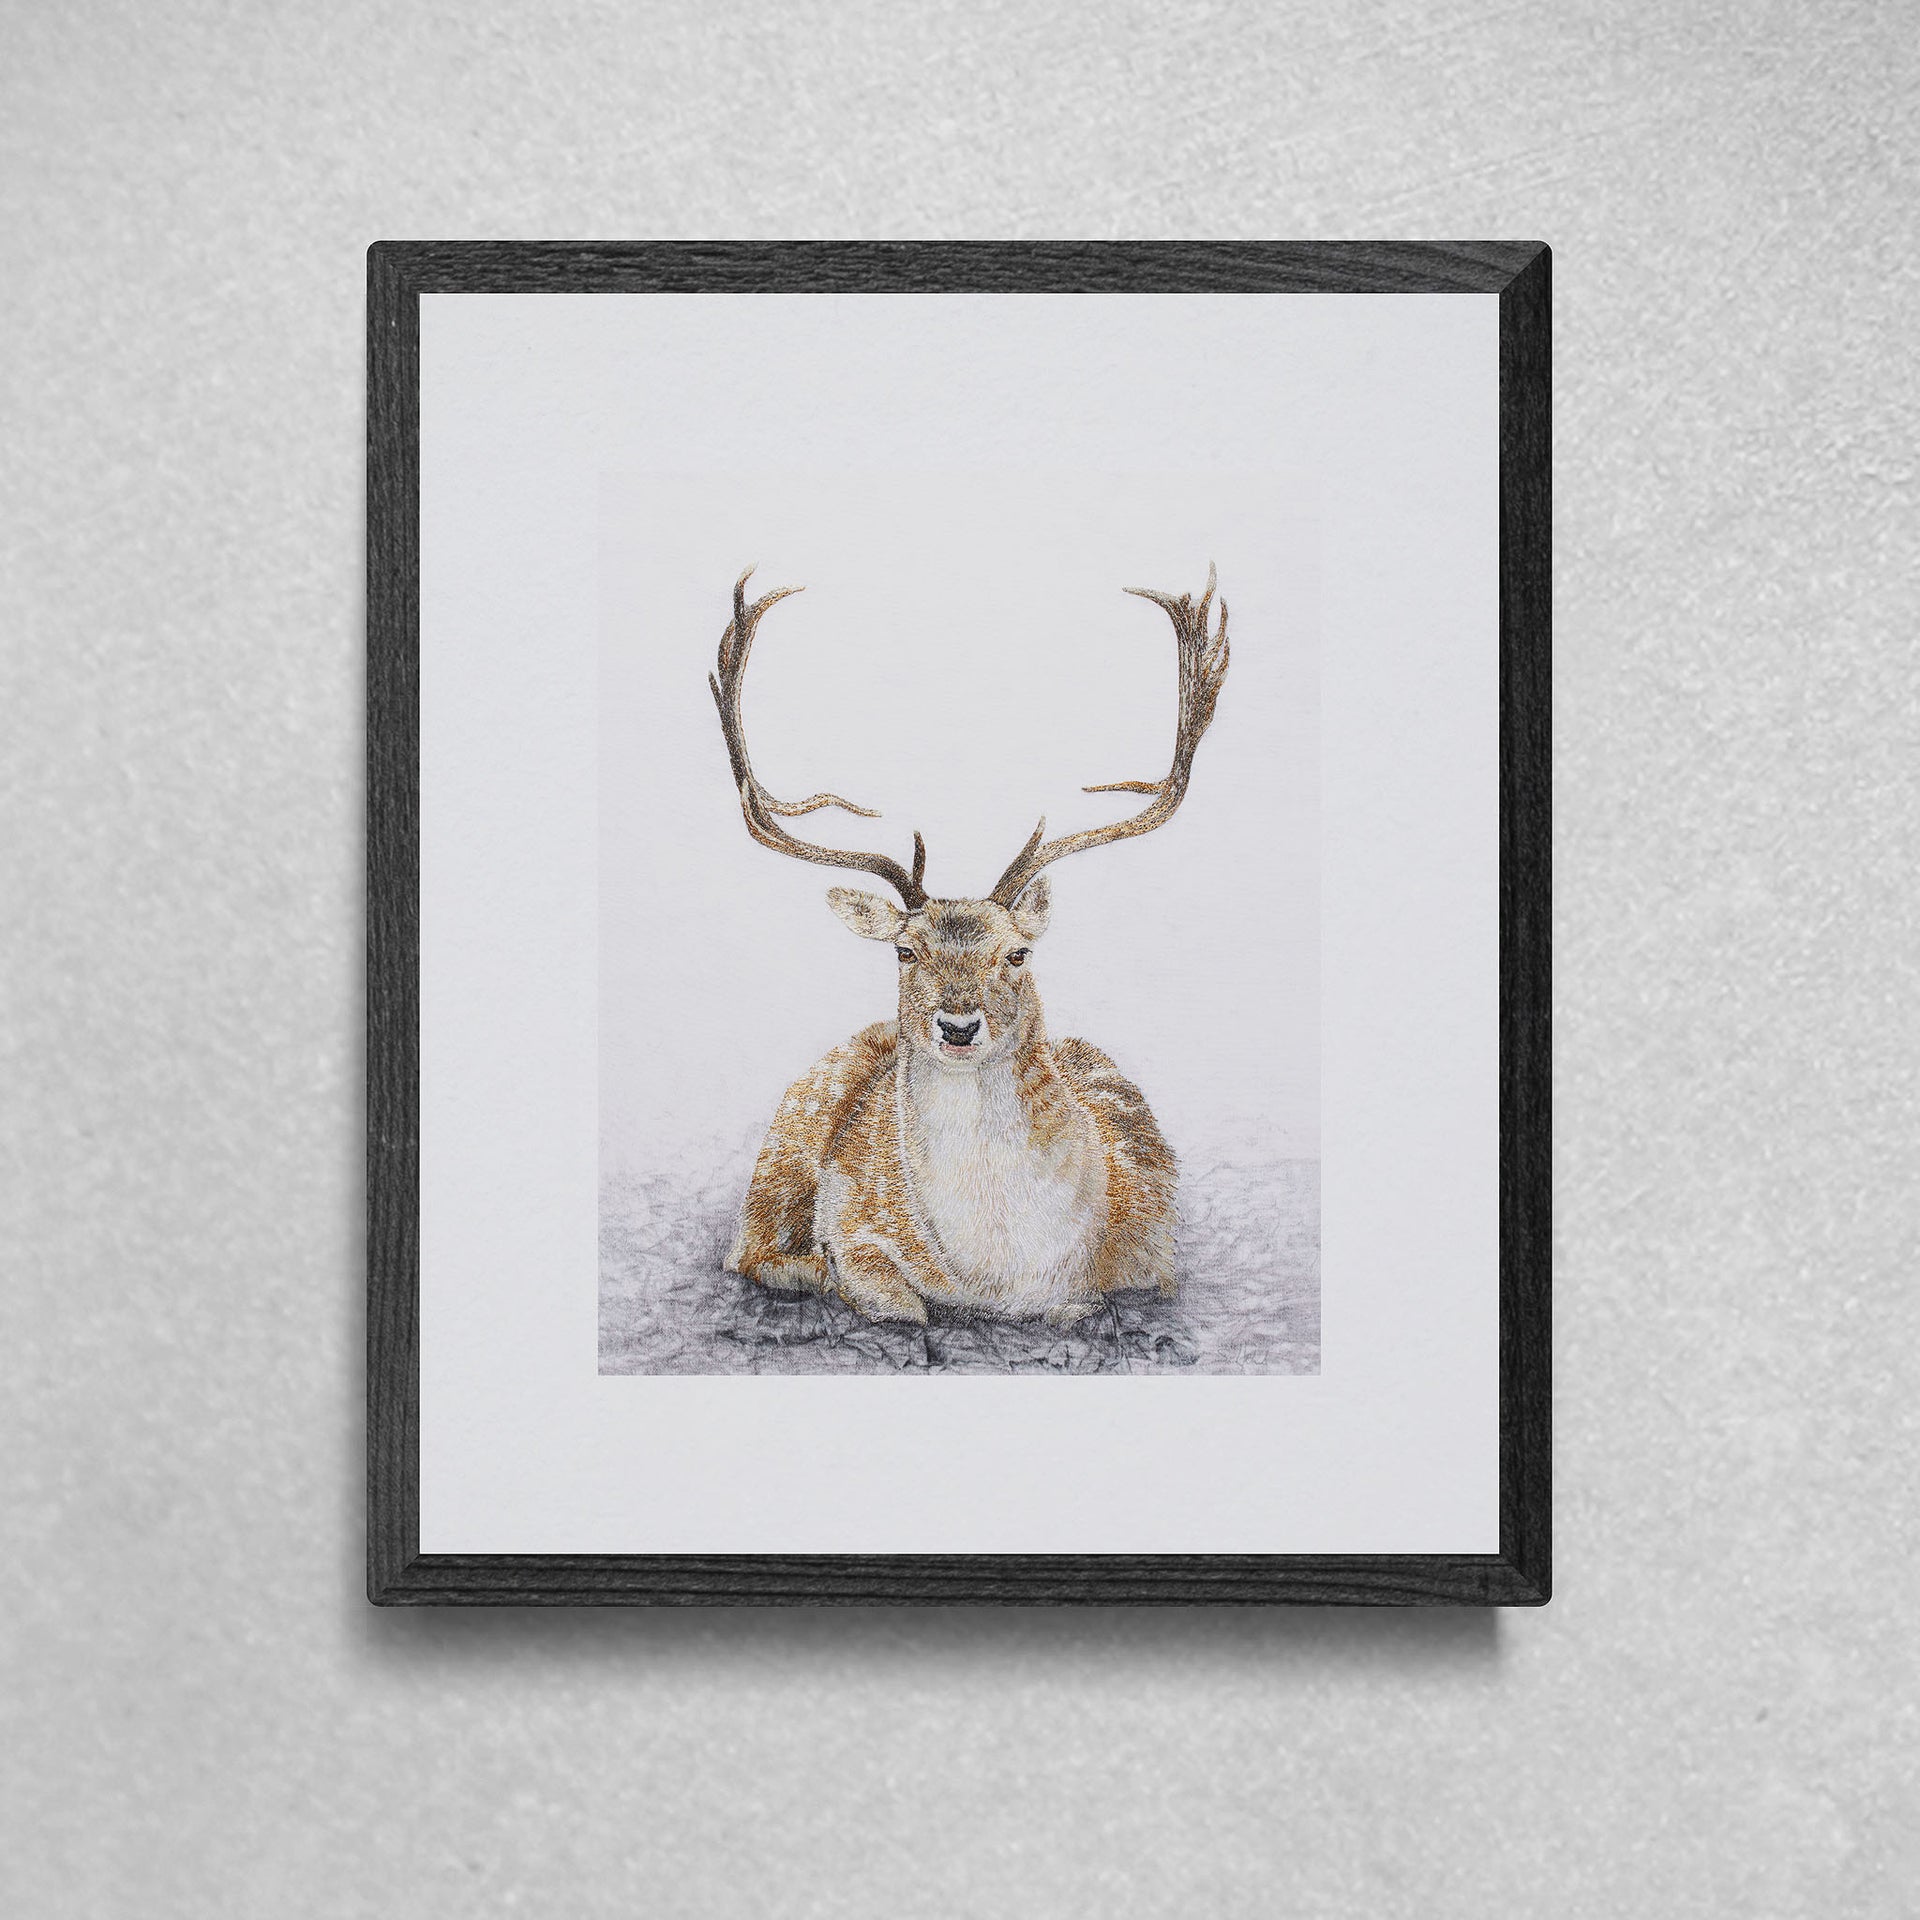 Hand embroidered siting deer limited edition print in black frame